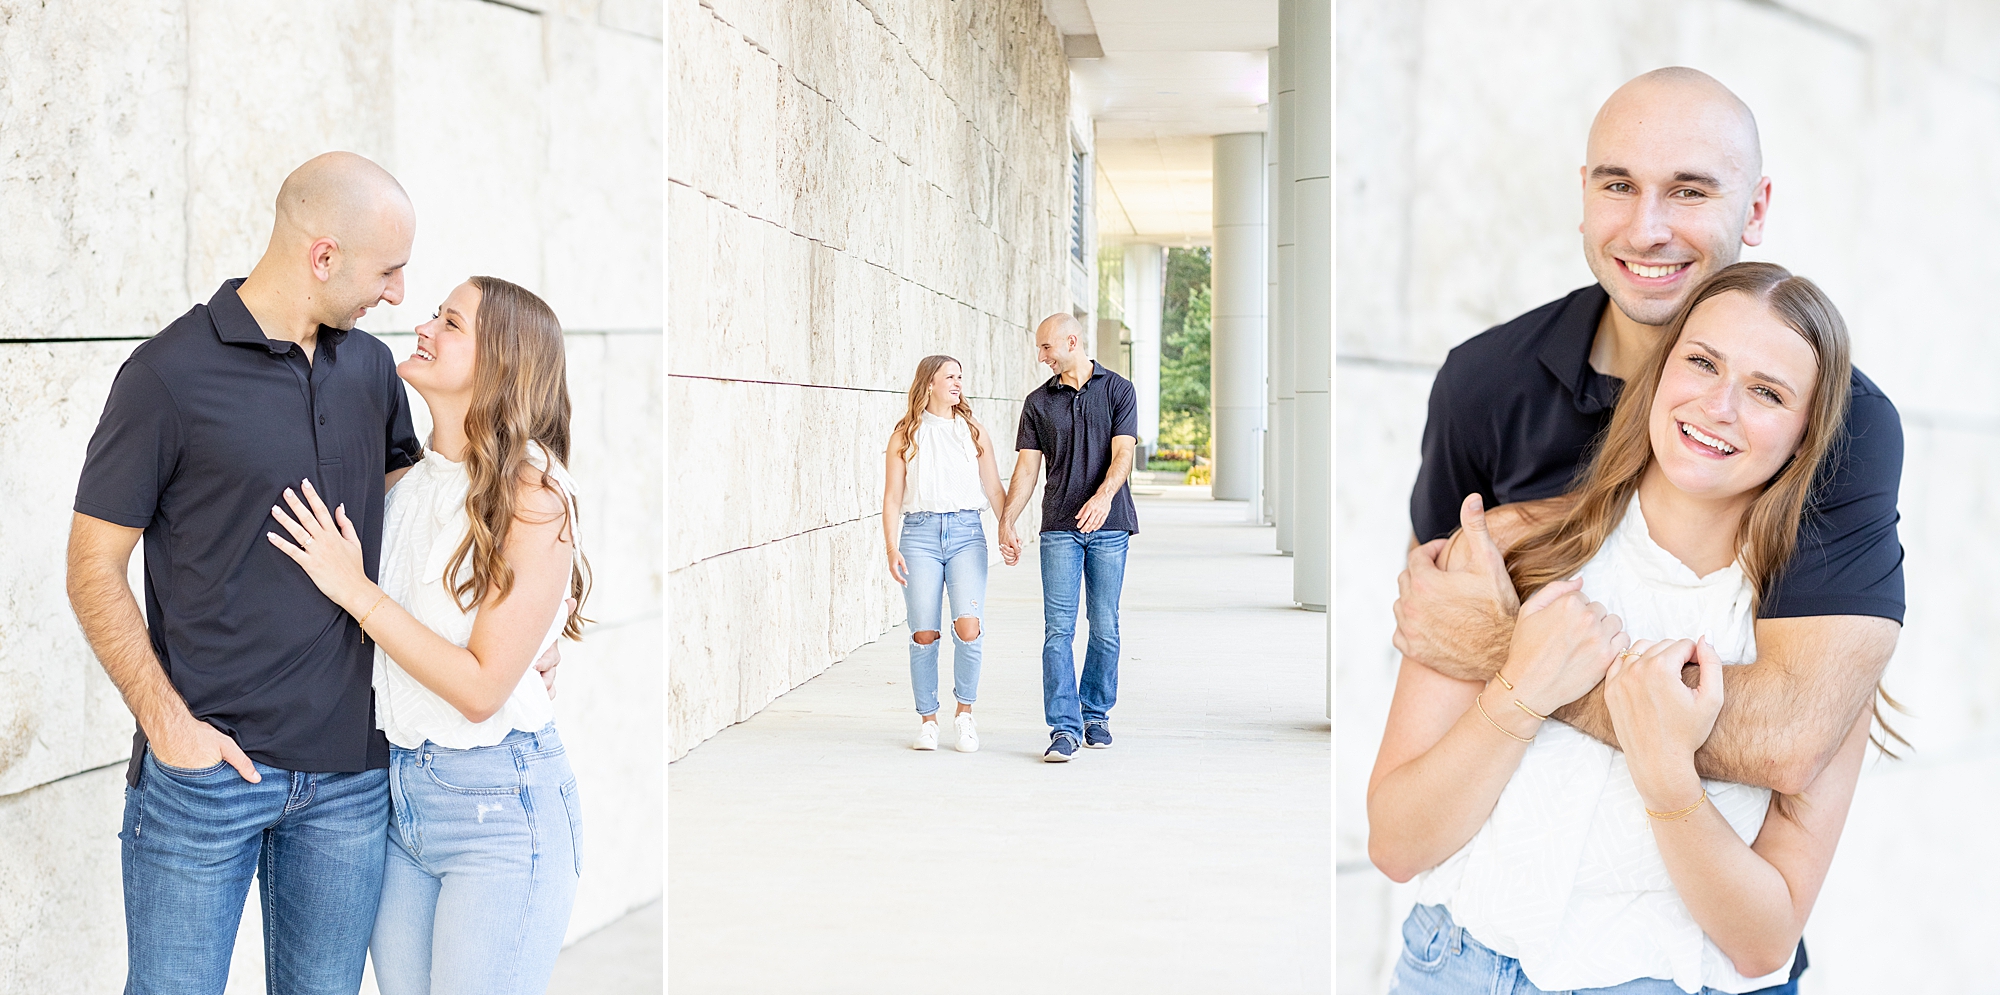 Engagement session in Houston TX